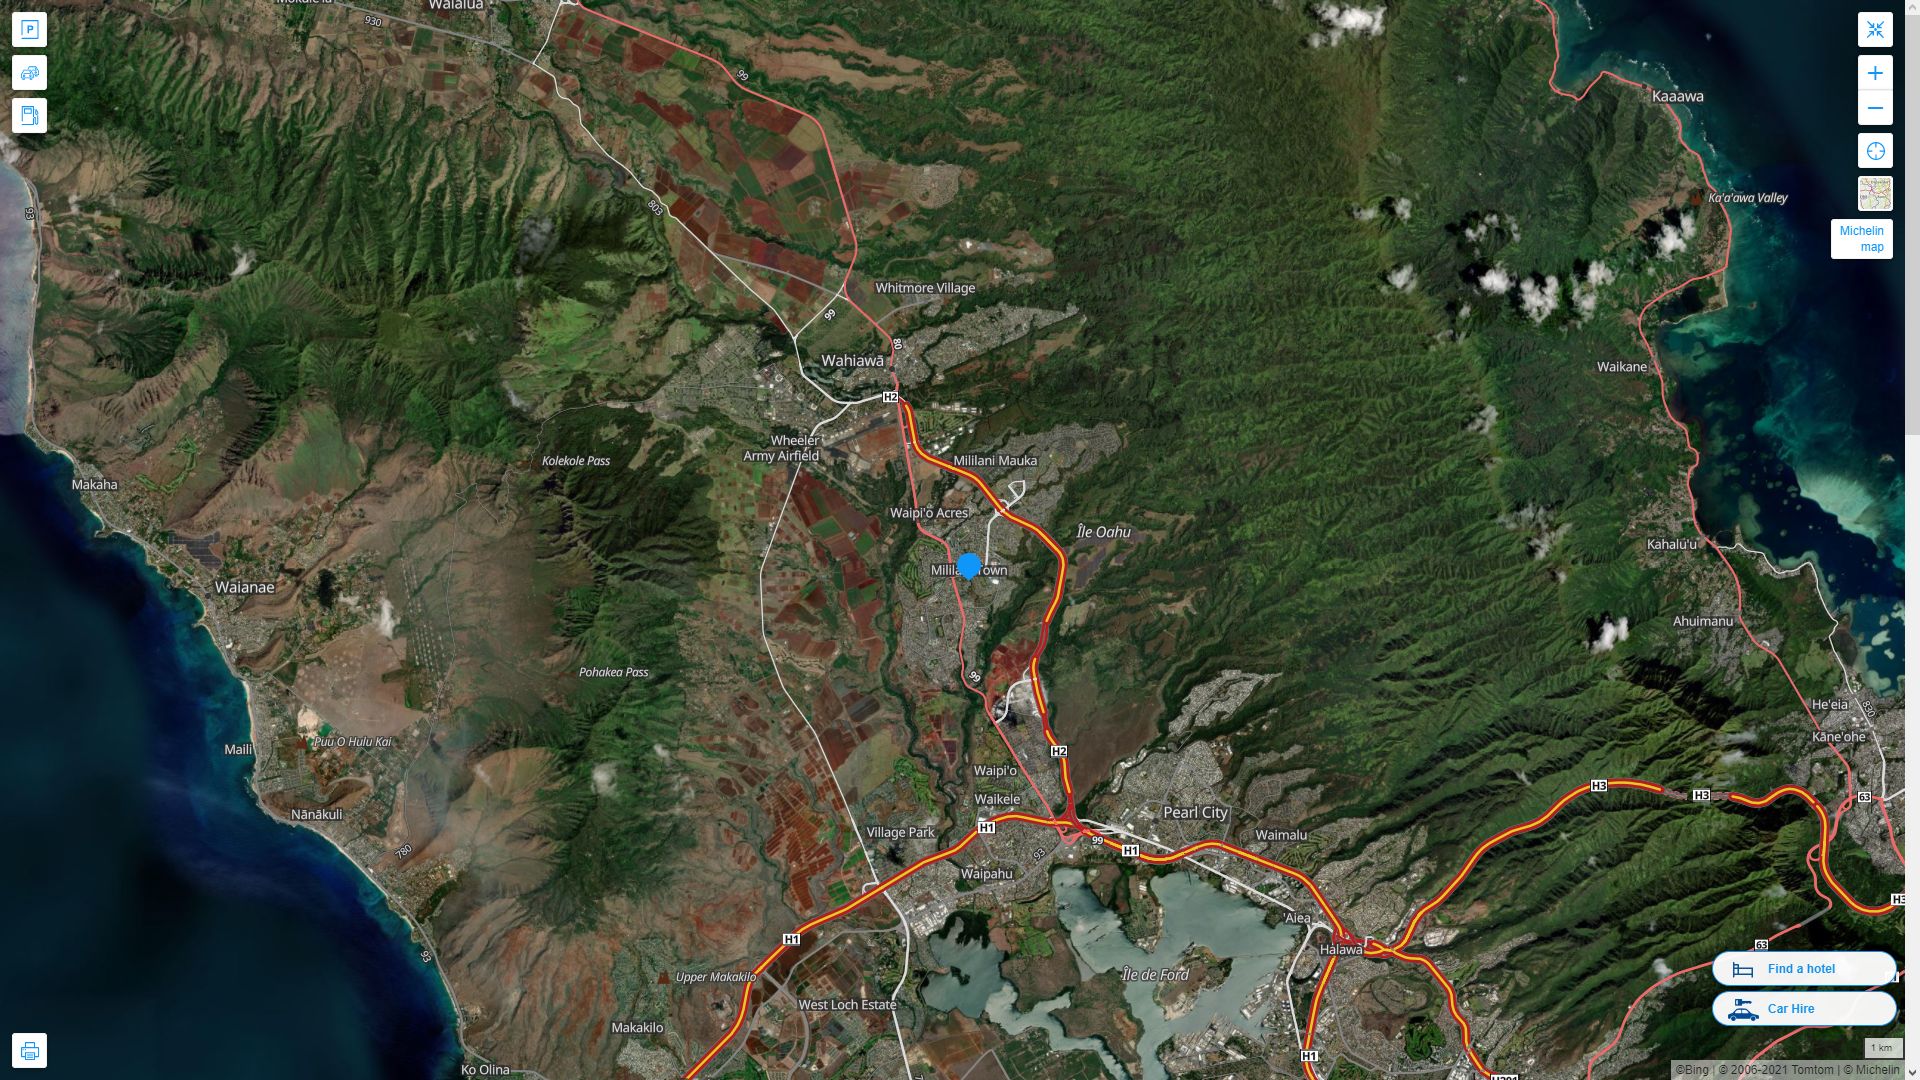 Mililani Town Hawaii Highway and Road Map with Satellite View